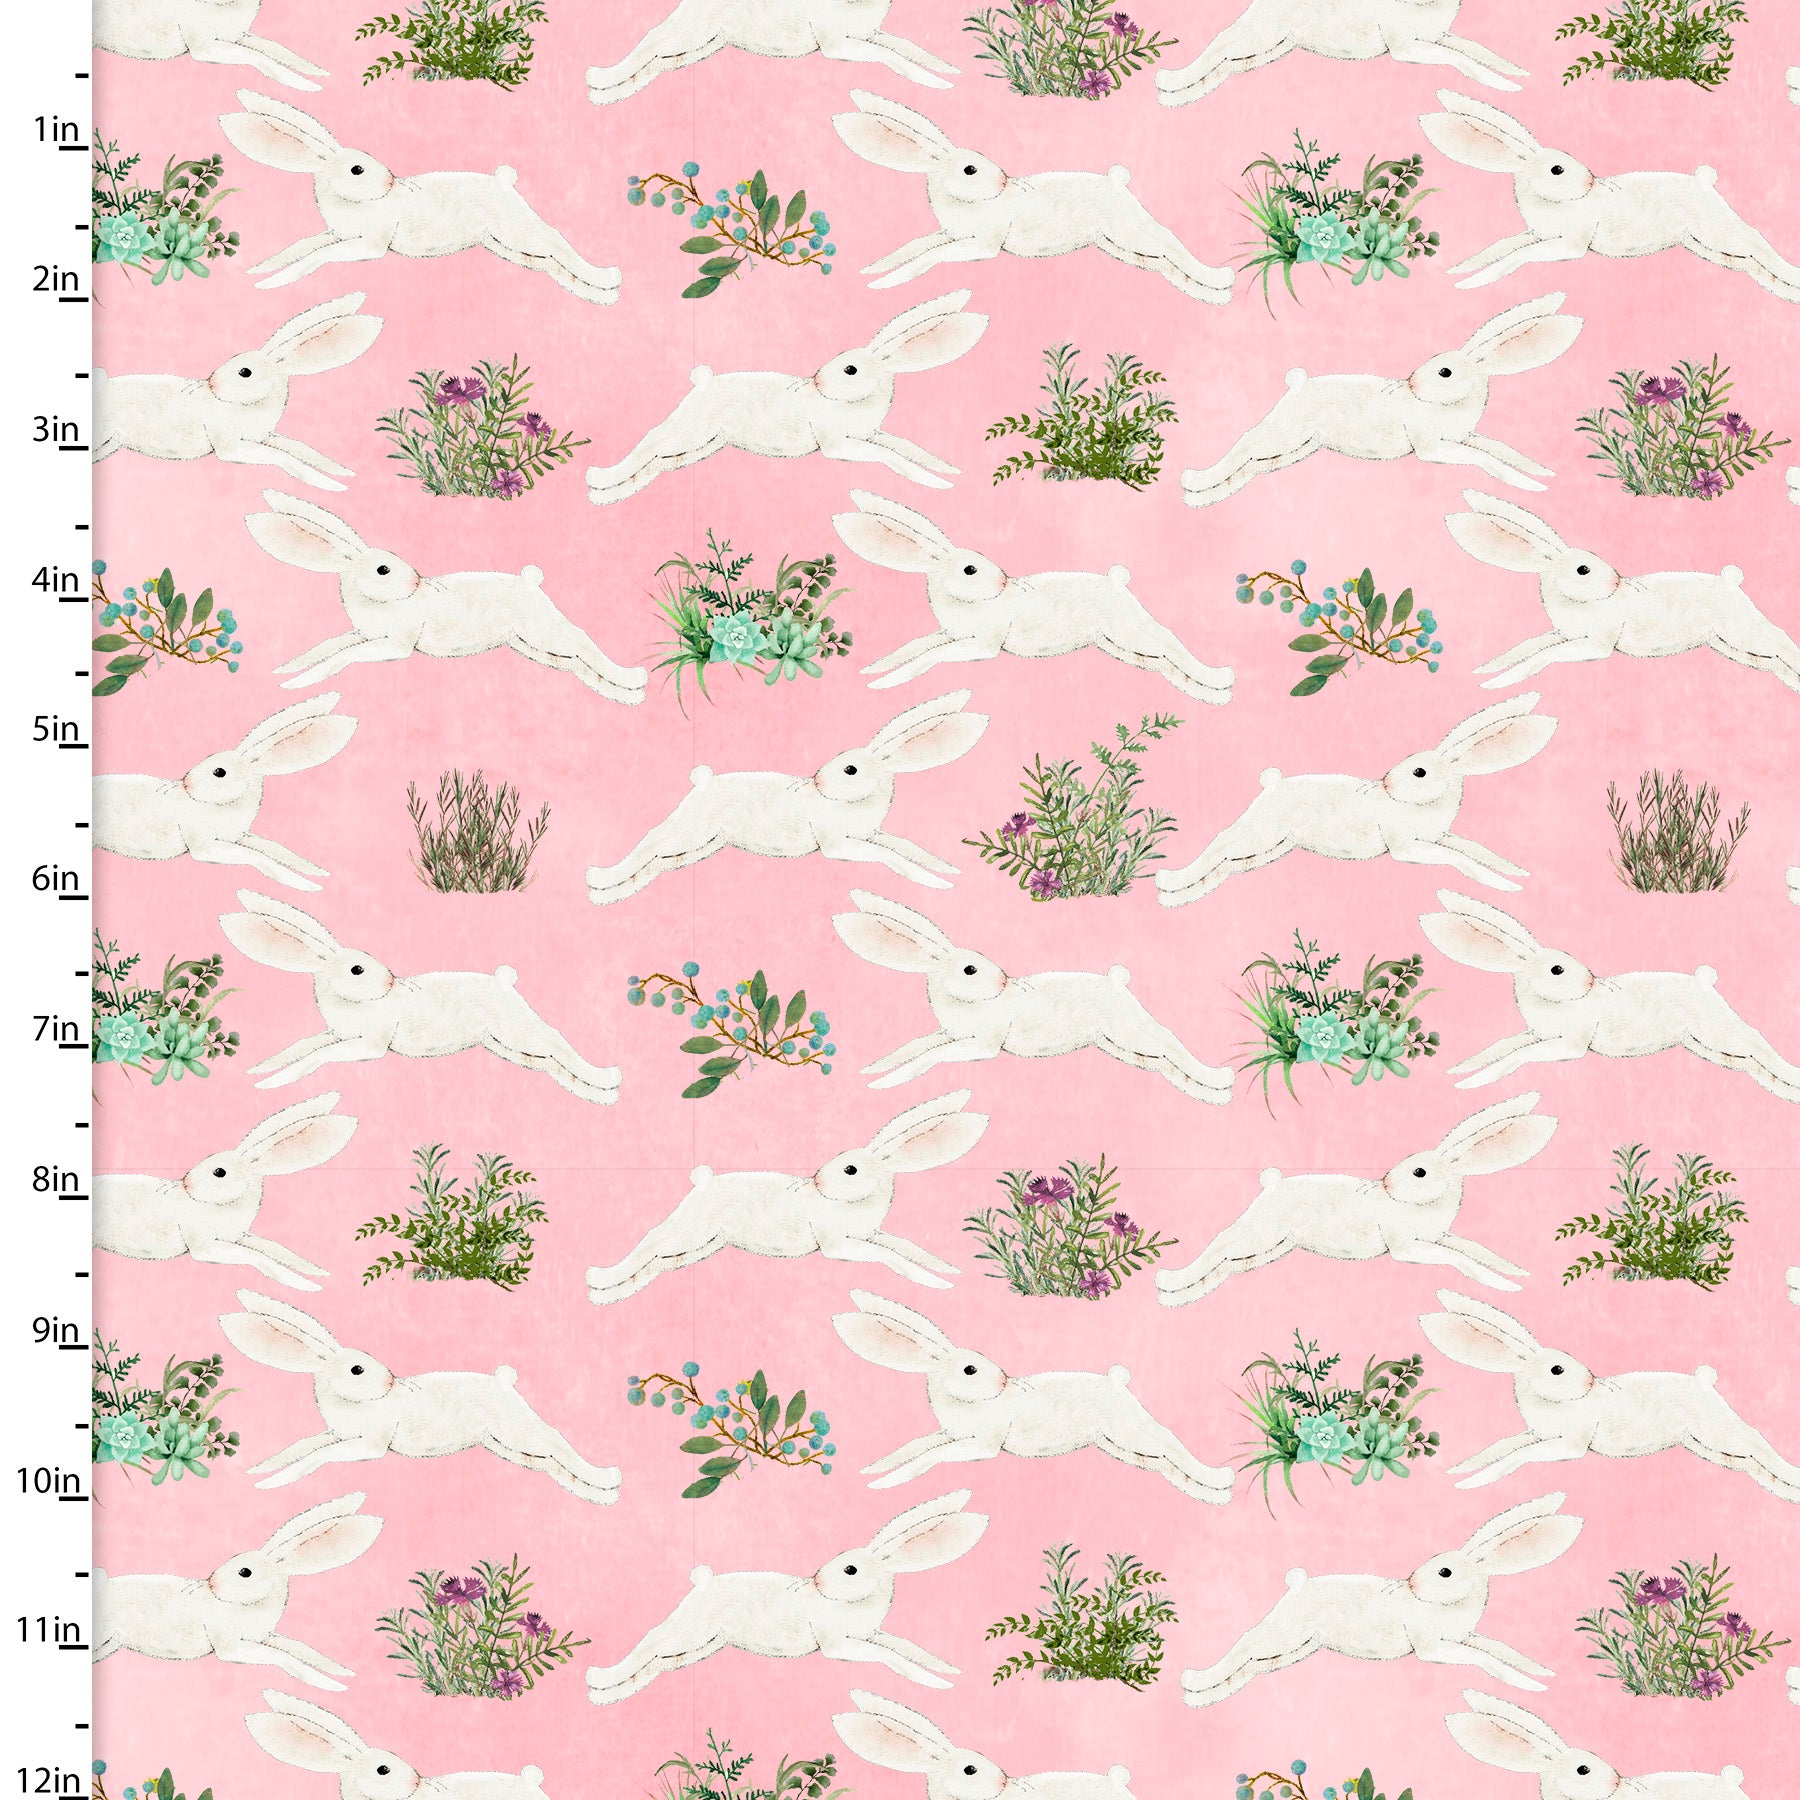 Green spring garden 100% cotton fabric - 'A Touch of Spring' 3 Wishes